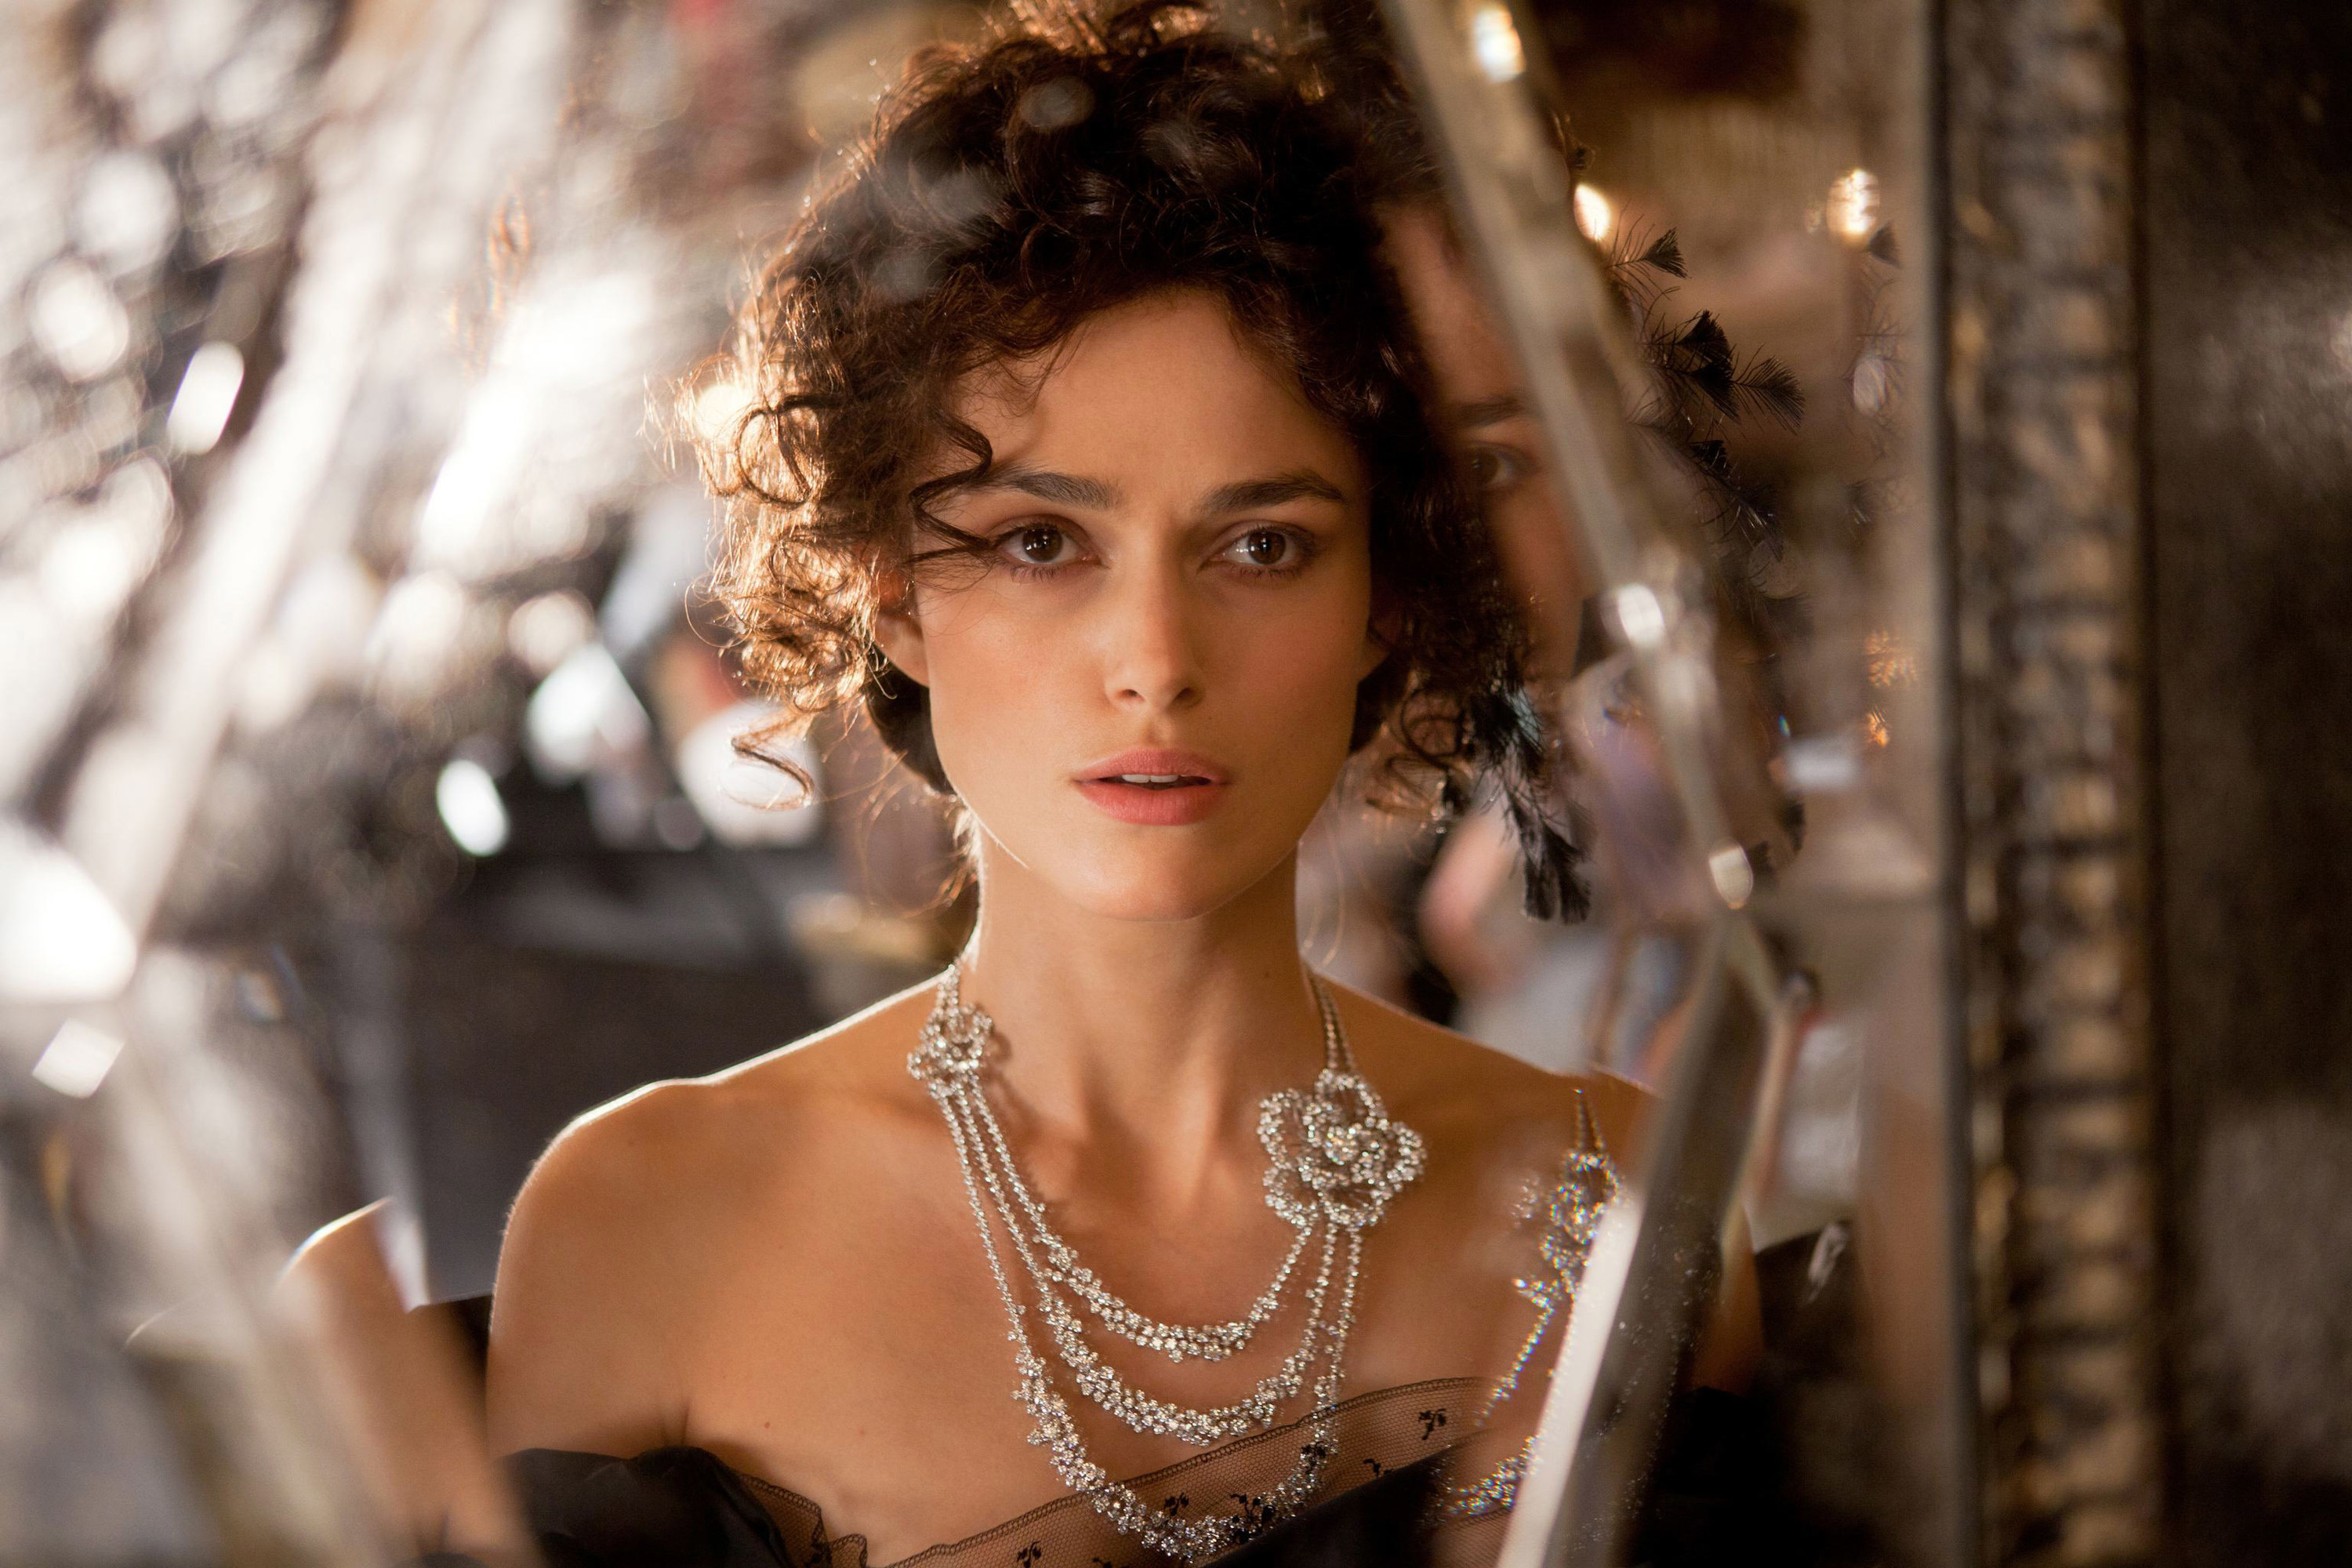 Keira wearing an ornate diamond necklace that has three chains of diamonds and flower designs